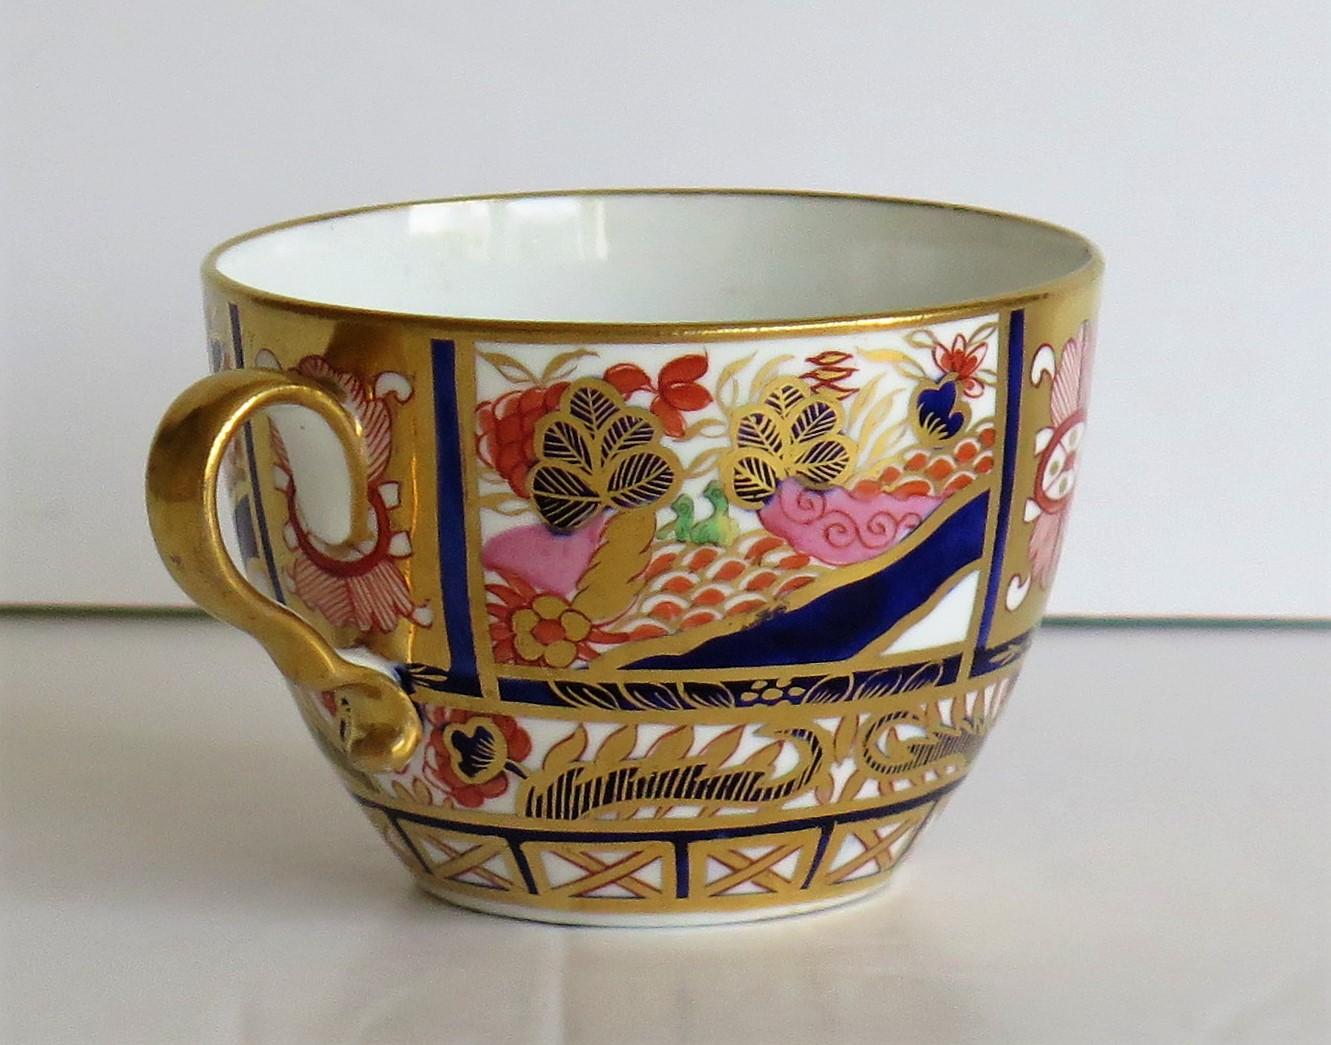 19th Century Early Spode Porcelain Tea Cup Heavily Gilded Pattern 963 Hand Painted